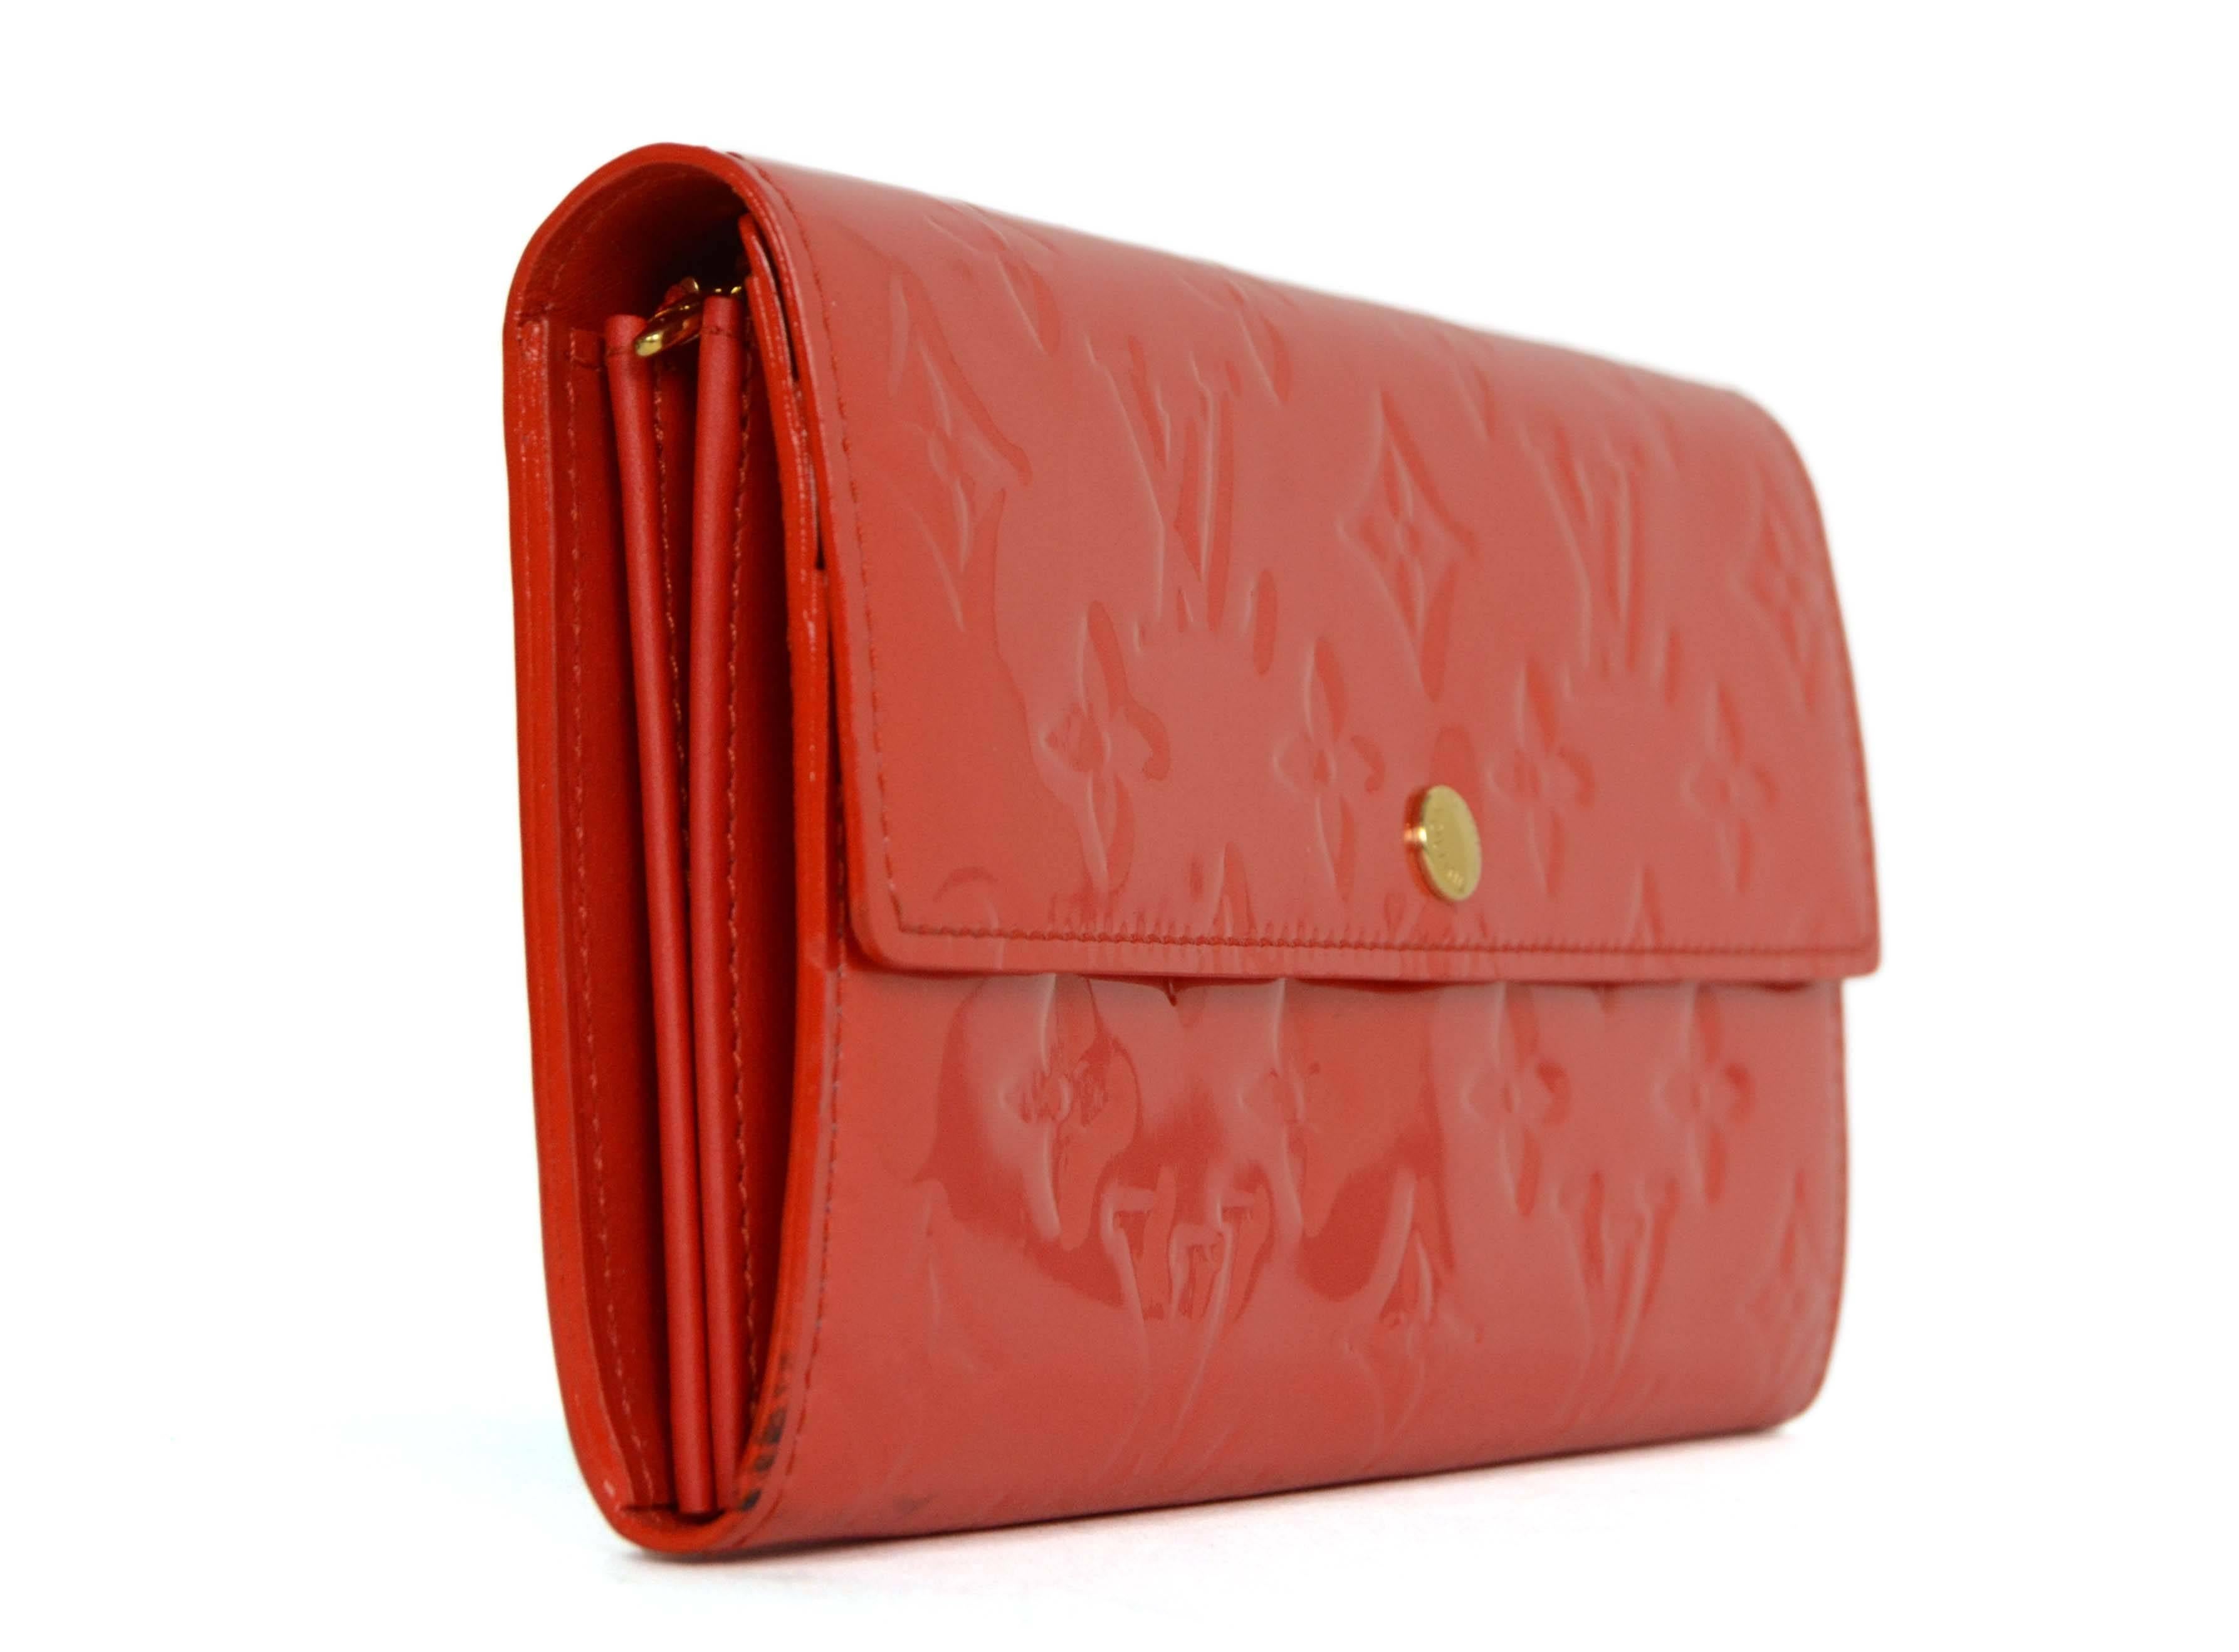 Louis Vuitton Red Vernis Sara Wallet 
Made In: France
Year of Production: 2009
Color: Red
Hardware: Goldtone
Materials: Patent leather and metal
Lining: Red leather
Closure/Opening: Flap top with snap closure
Exterior Pockets: None
Interior